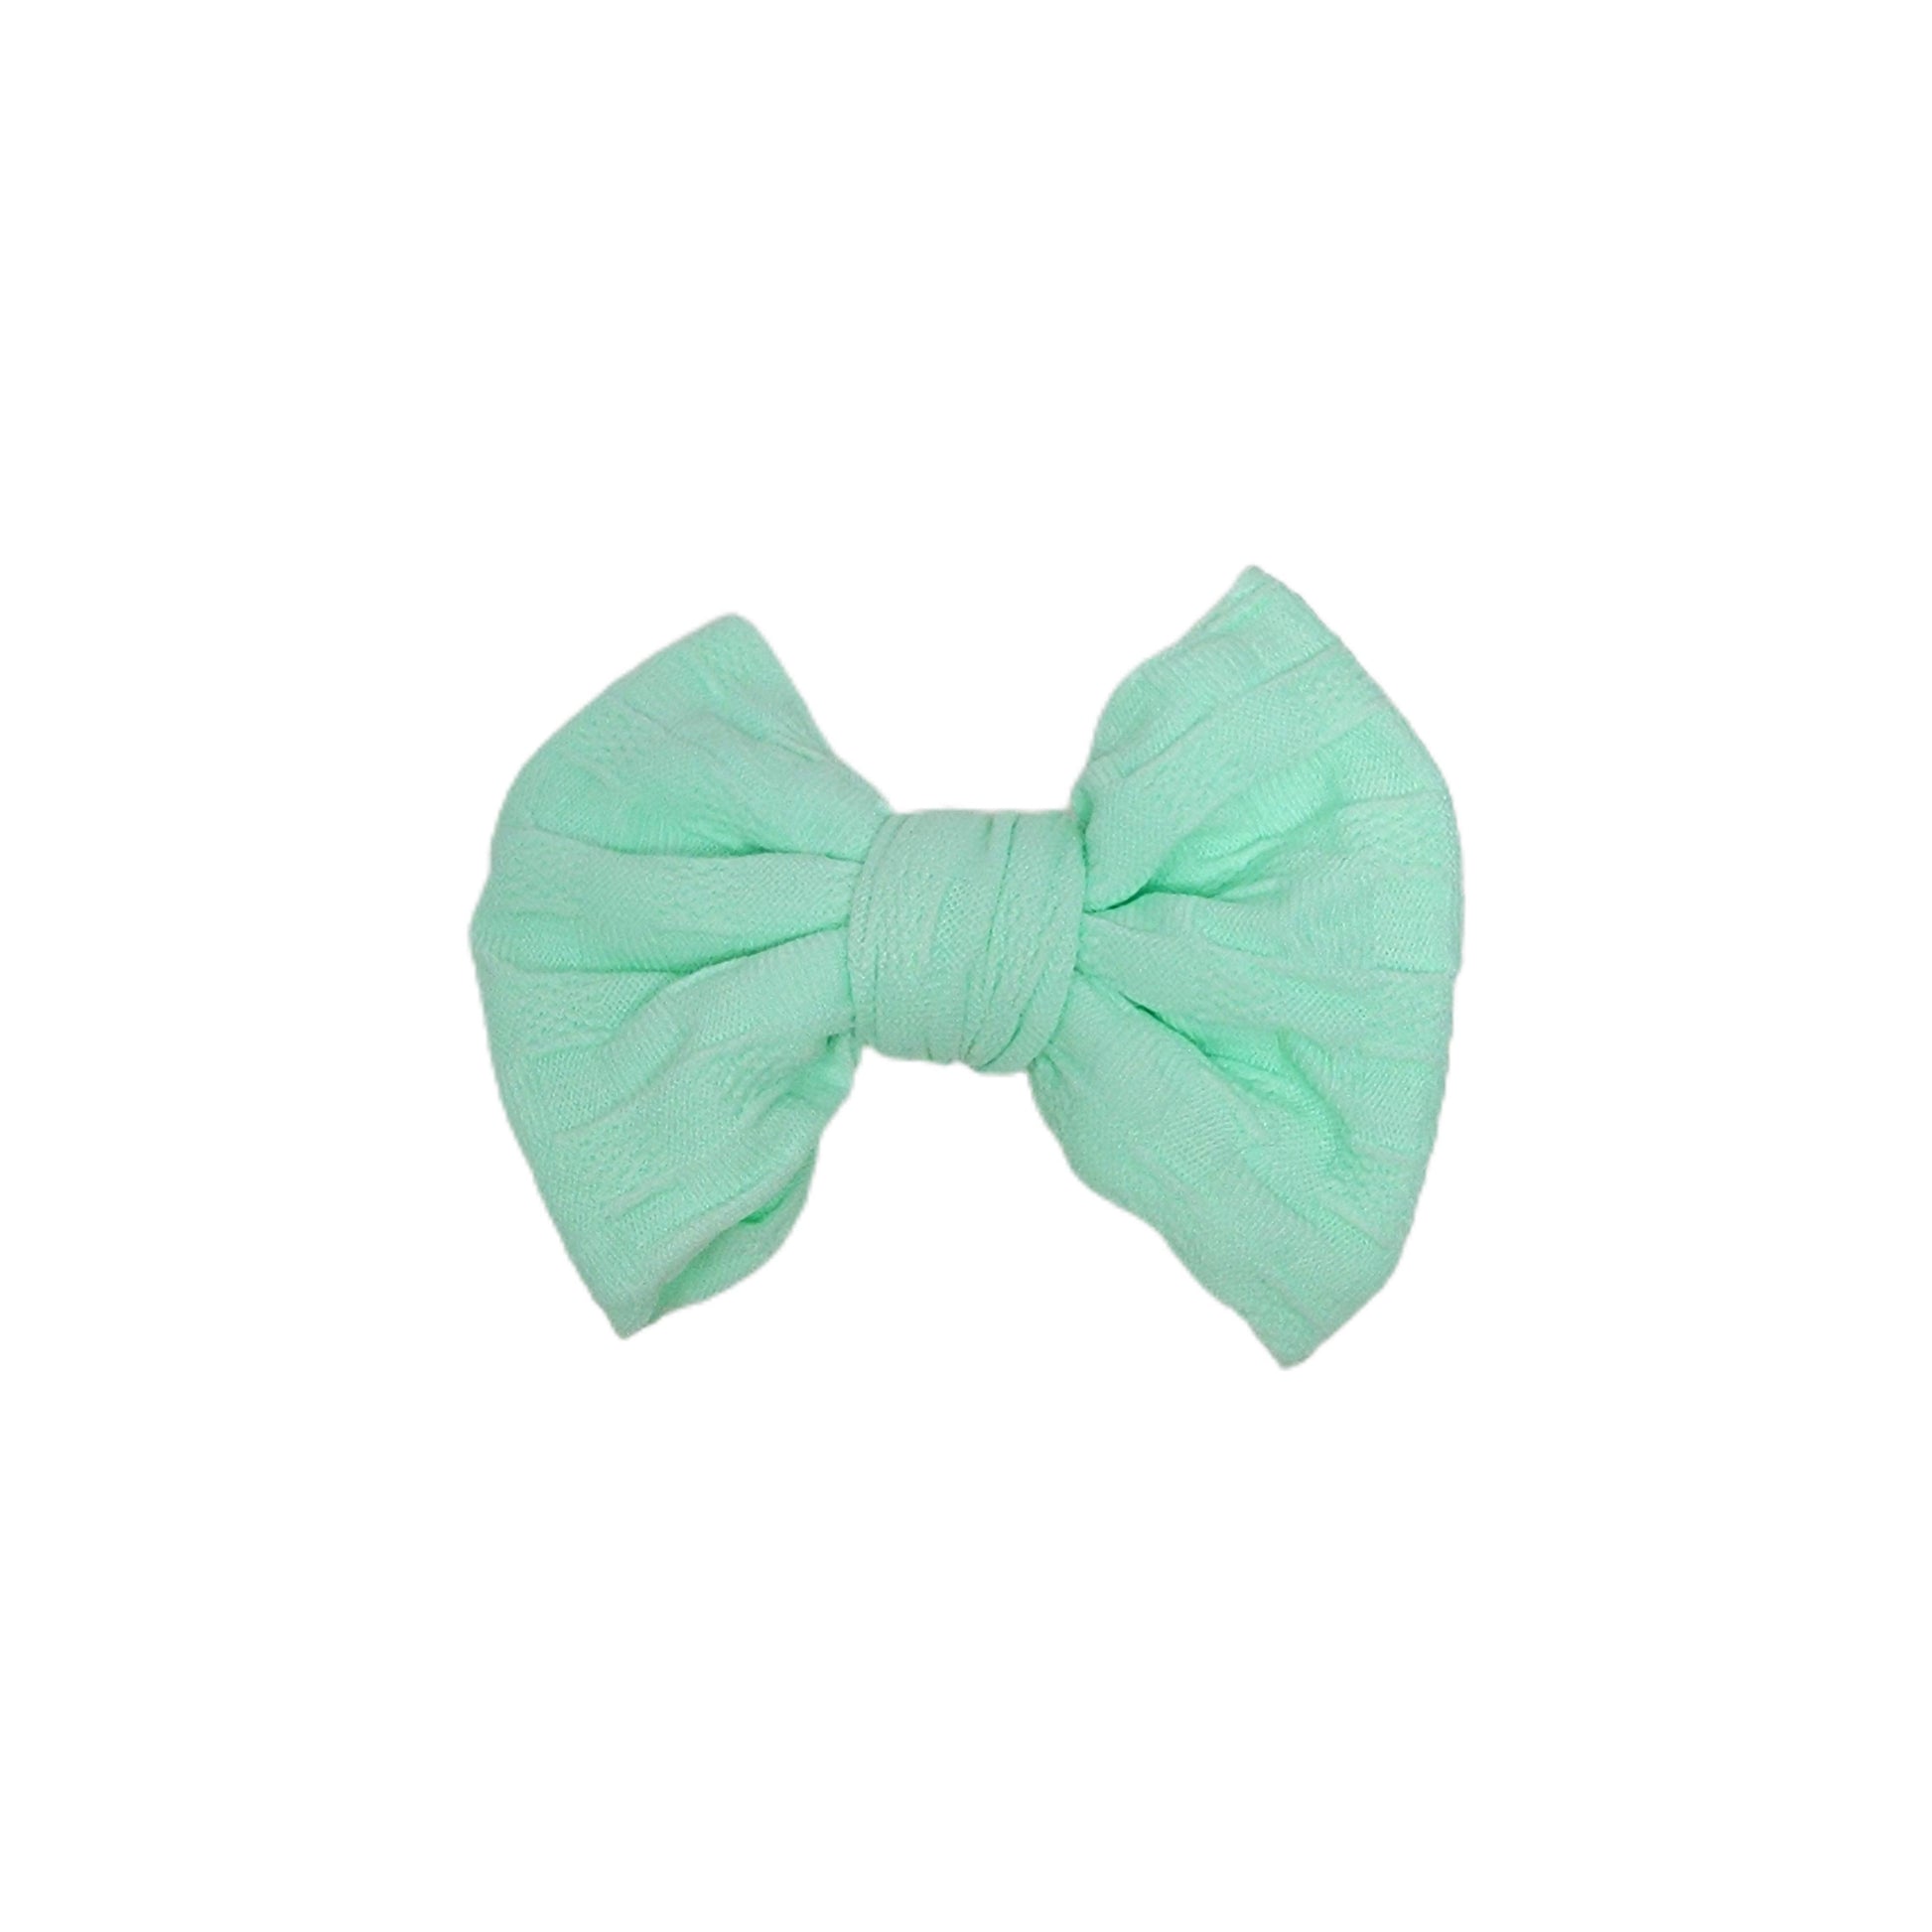 Mint Woven Knit Fabric Bow 4" 